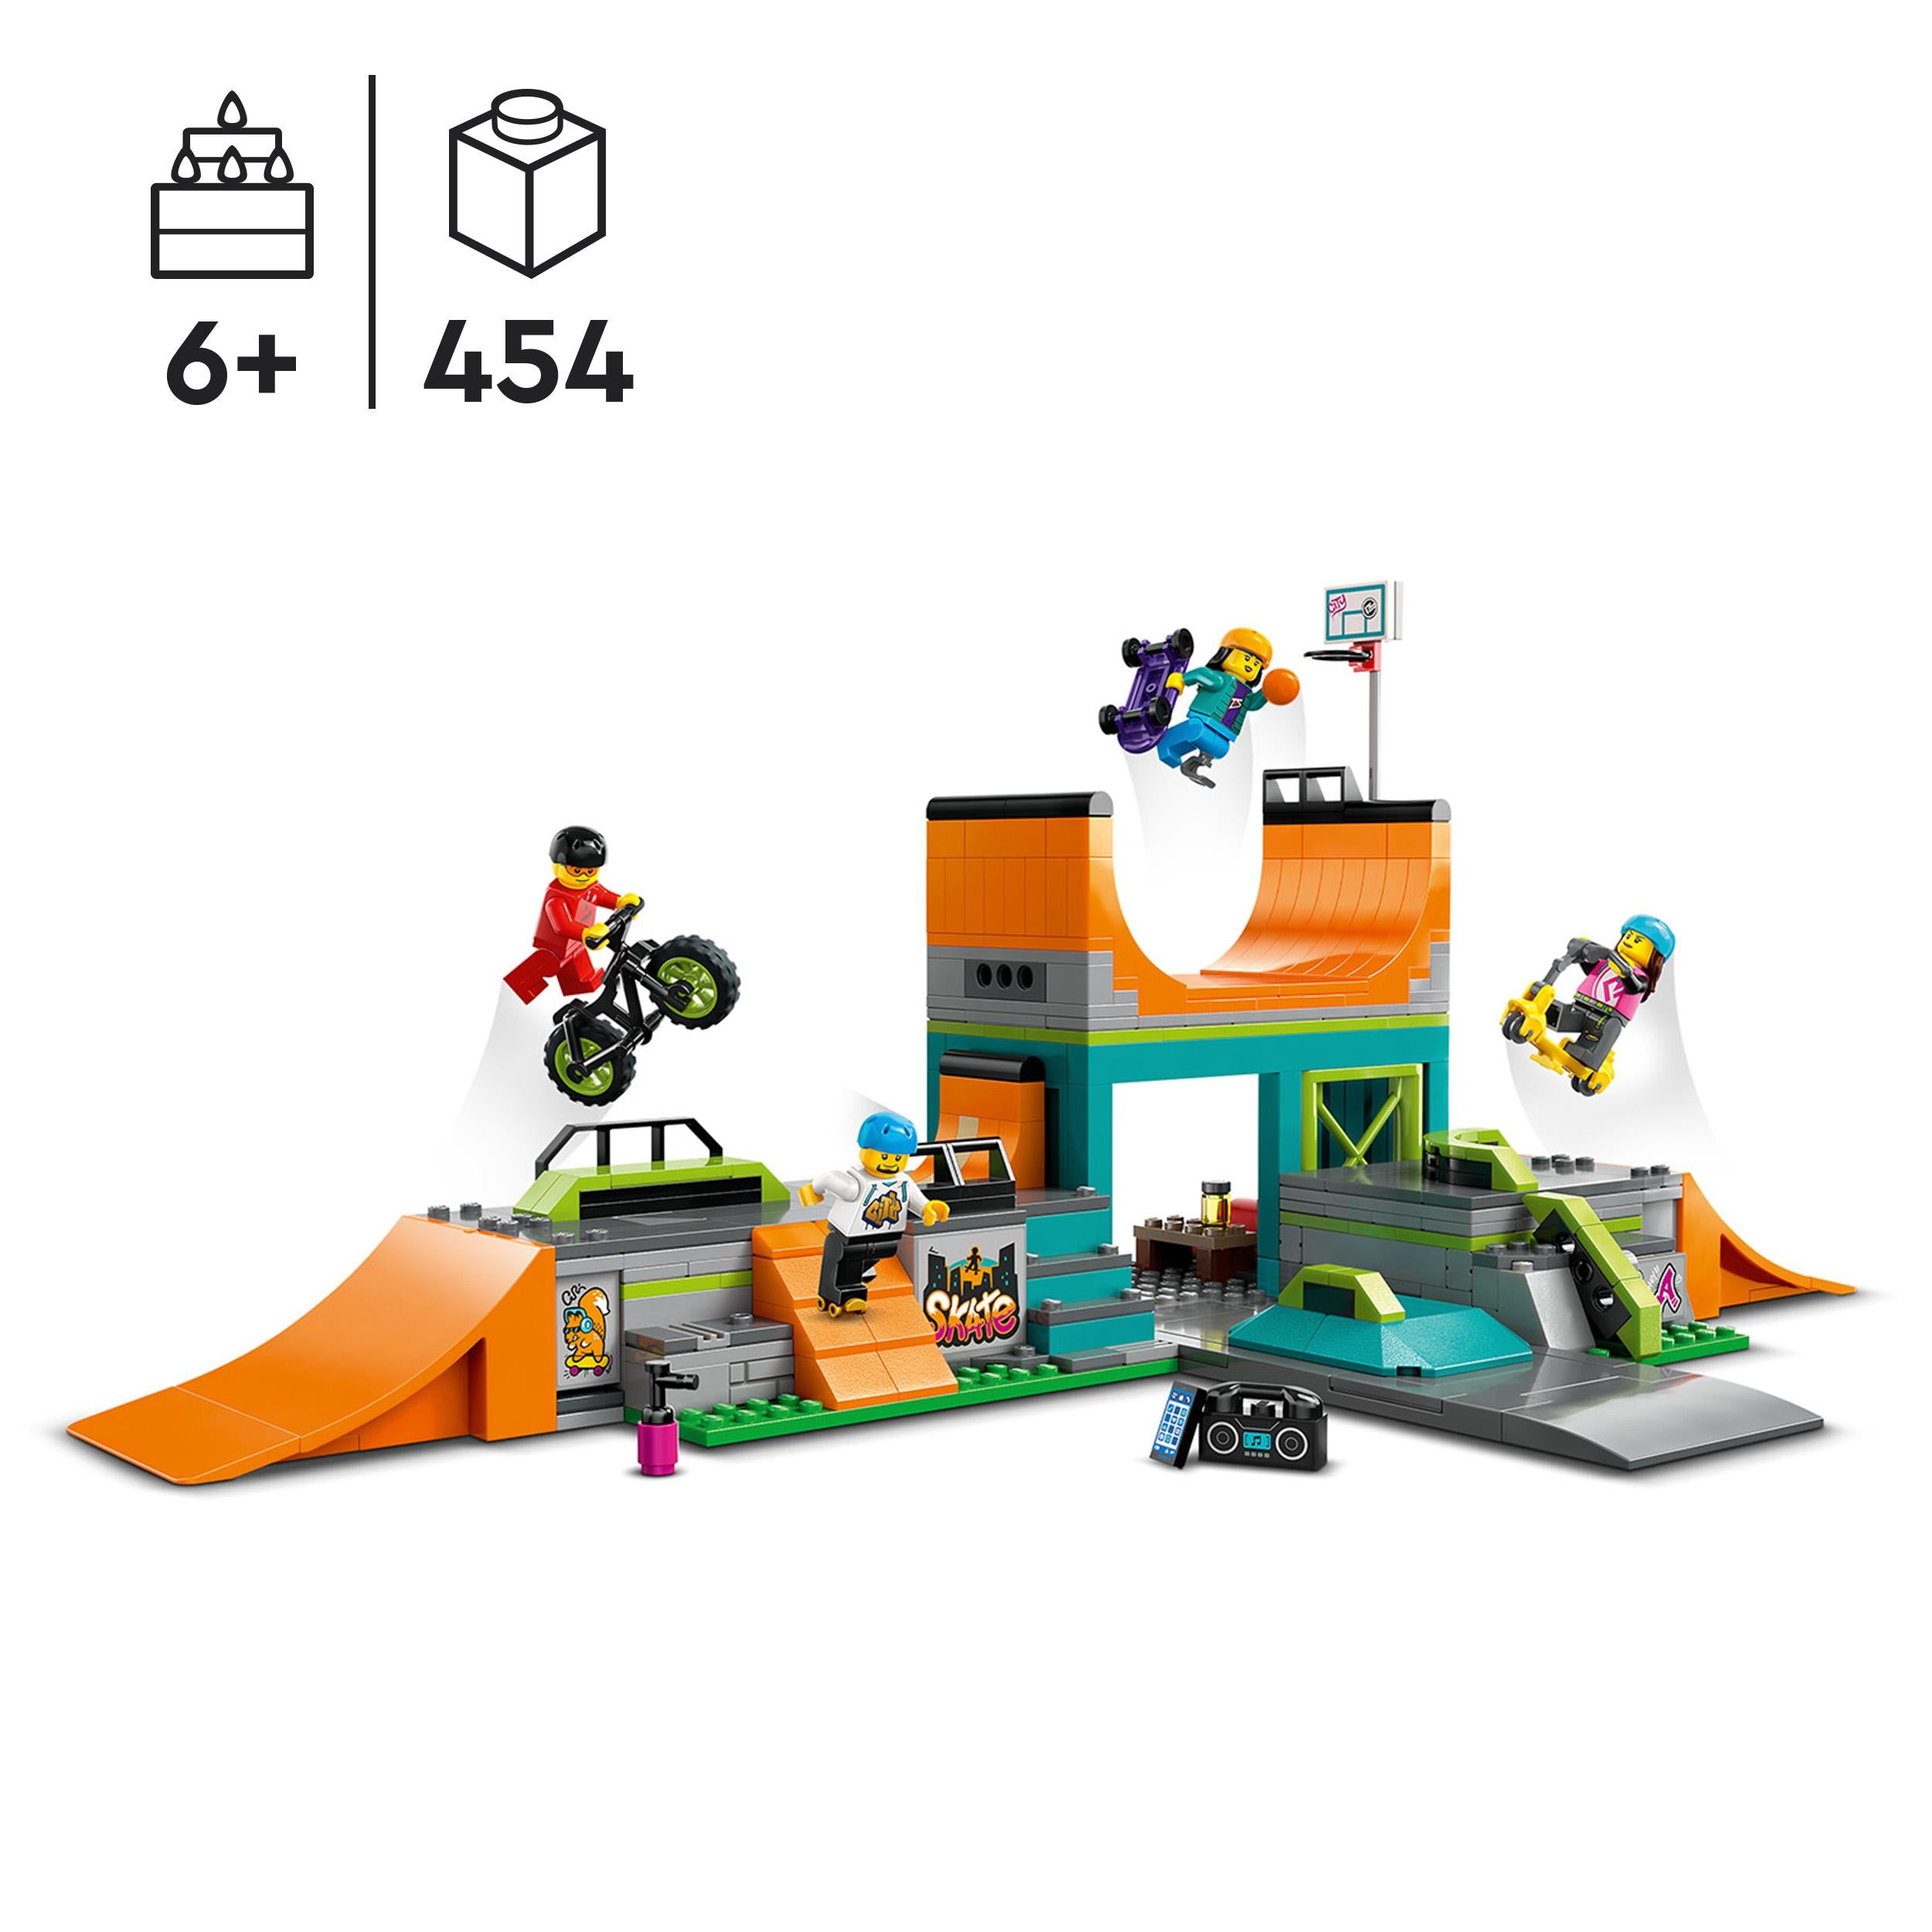 LEGO 60364 City Street Skate Park Set, Toy For Kids Aged 6 Plus Years Old with BMX Bike, Skateboard, Scooter, In-Line Skates and 4 Skater Minifigures to Perform Stunts, 2023 Set